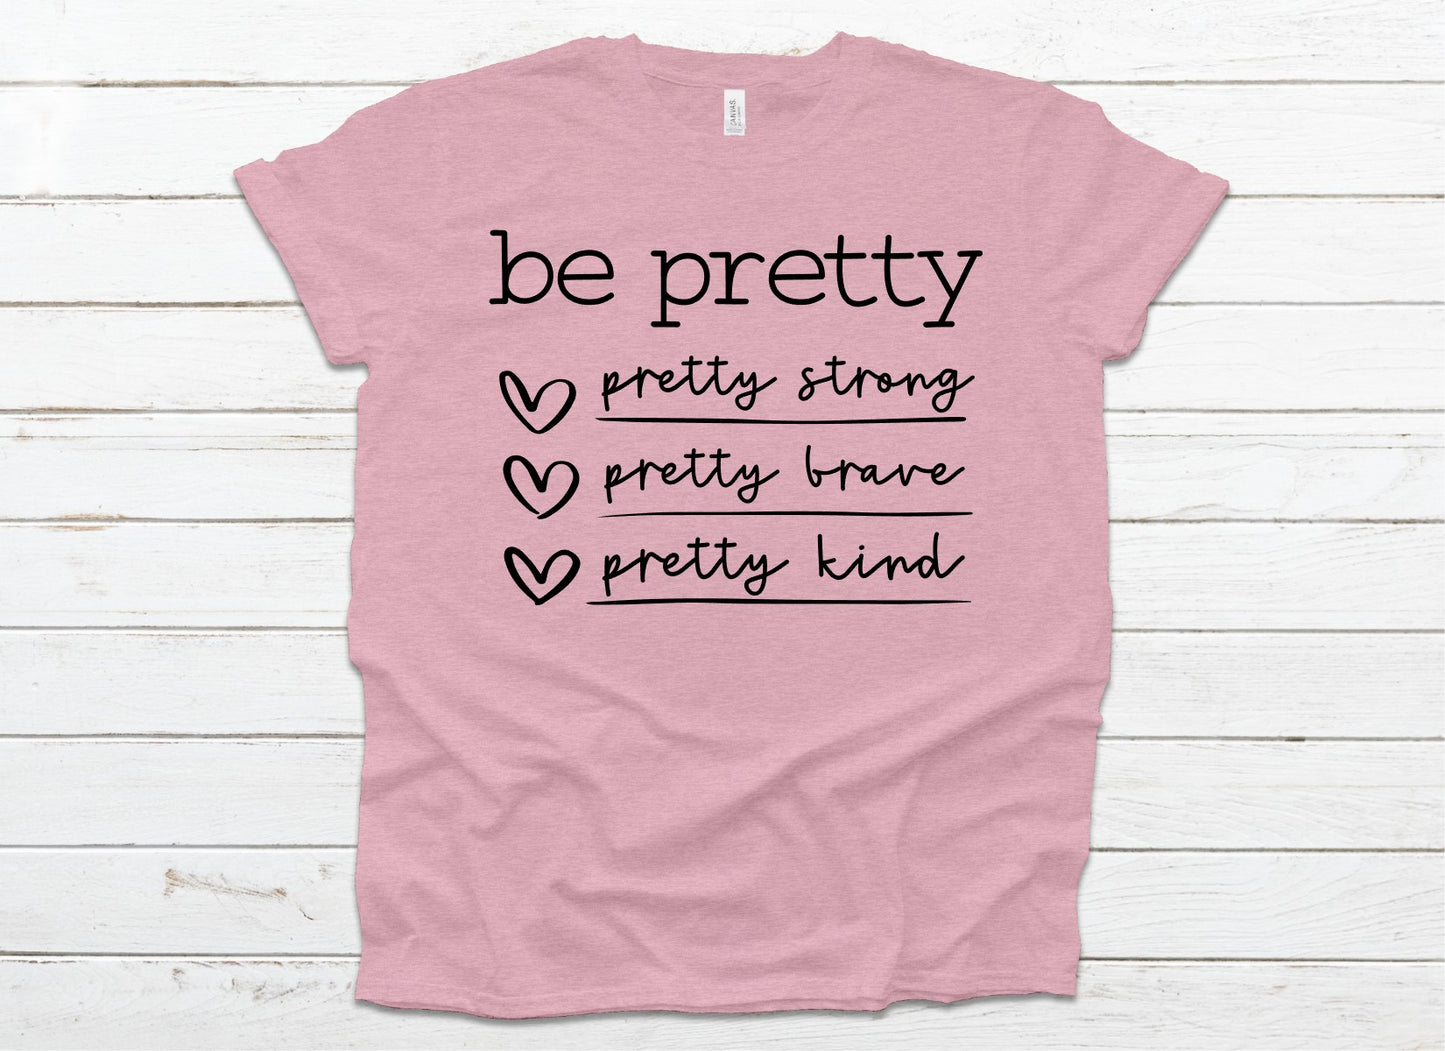 Be pretty strong brave and kind